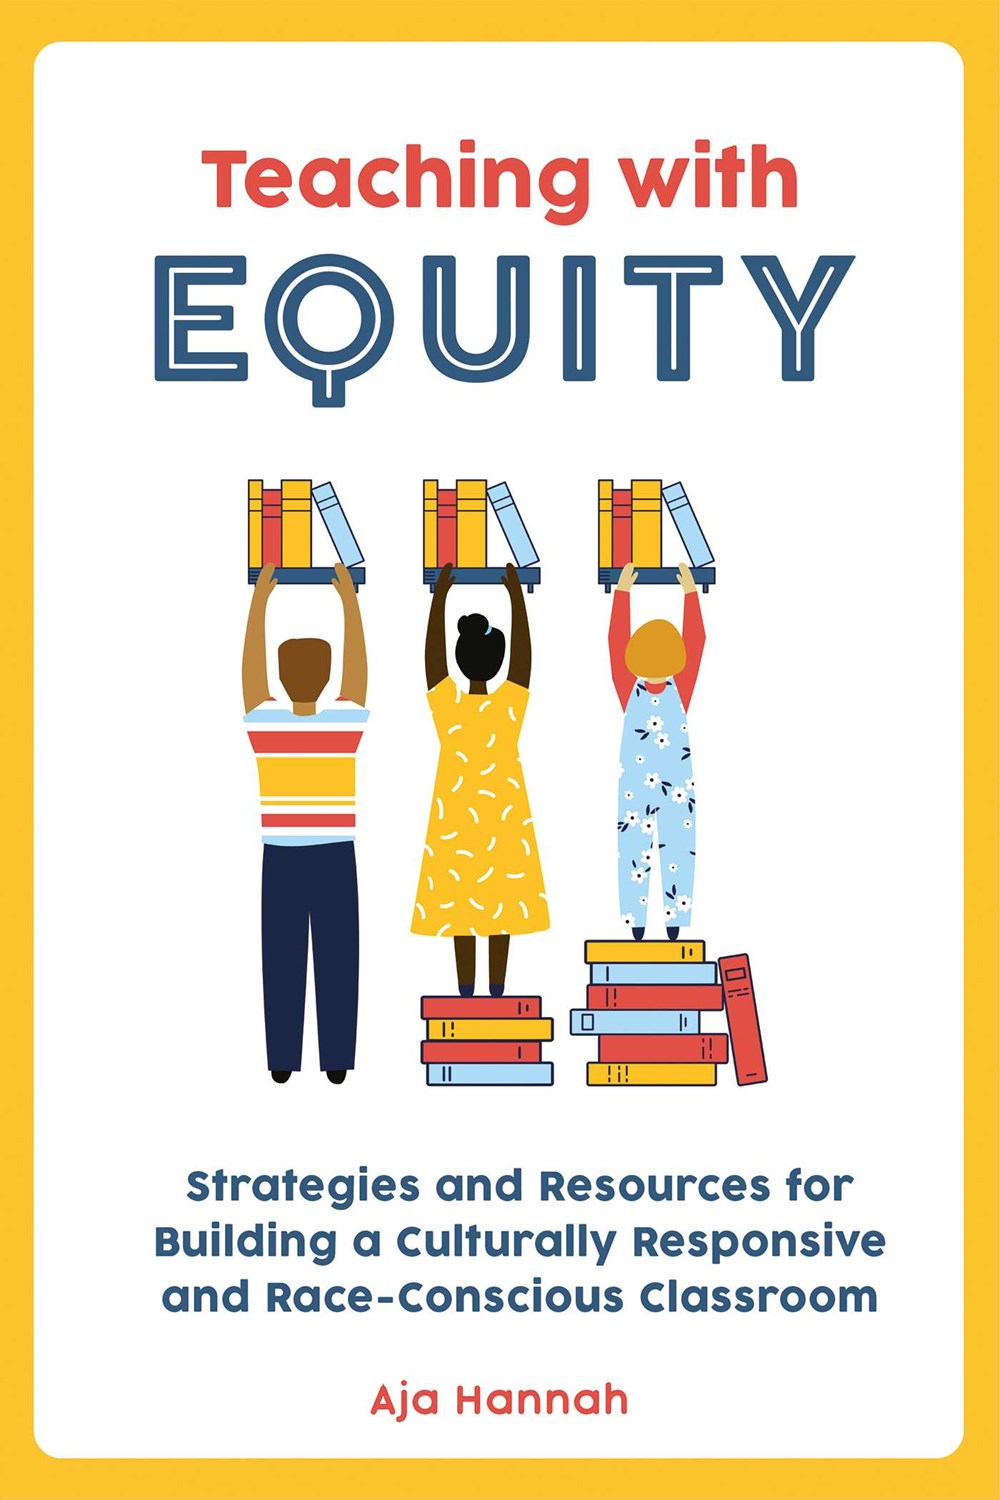 Teaching with Equity: Strategies and Resources for Building a Culturally Responsive and Race-Conscious Classroom by Aja Hannah